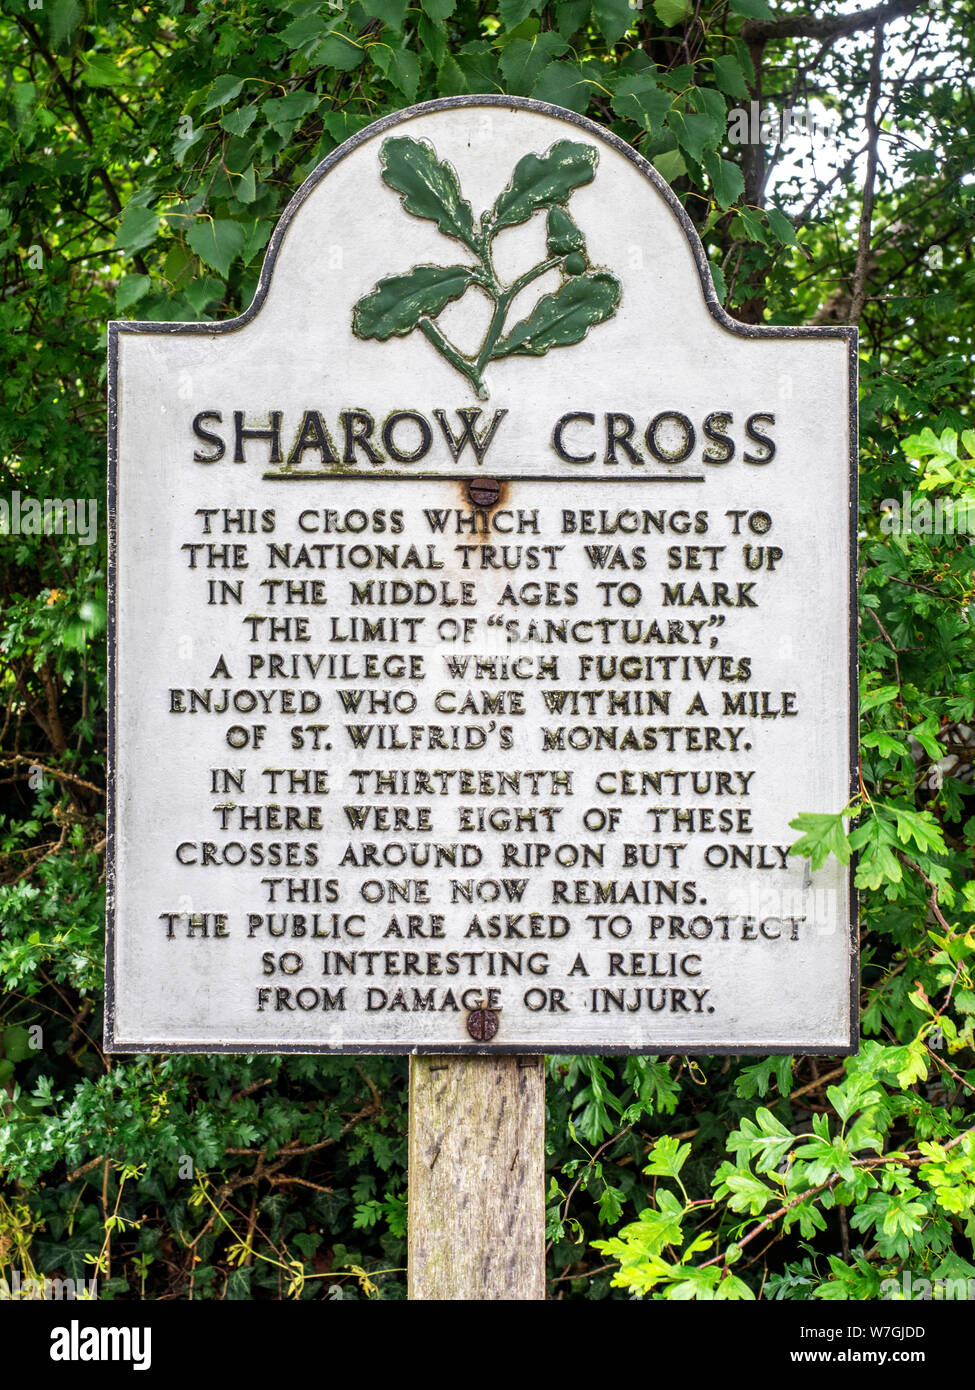 NT sign at Sharow Cross marking the limit of sanctuary one mile from Ripon Cathedral at Sharow near Ripon Yorkshire England Stock Photo